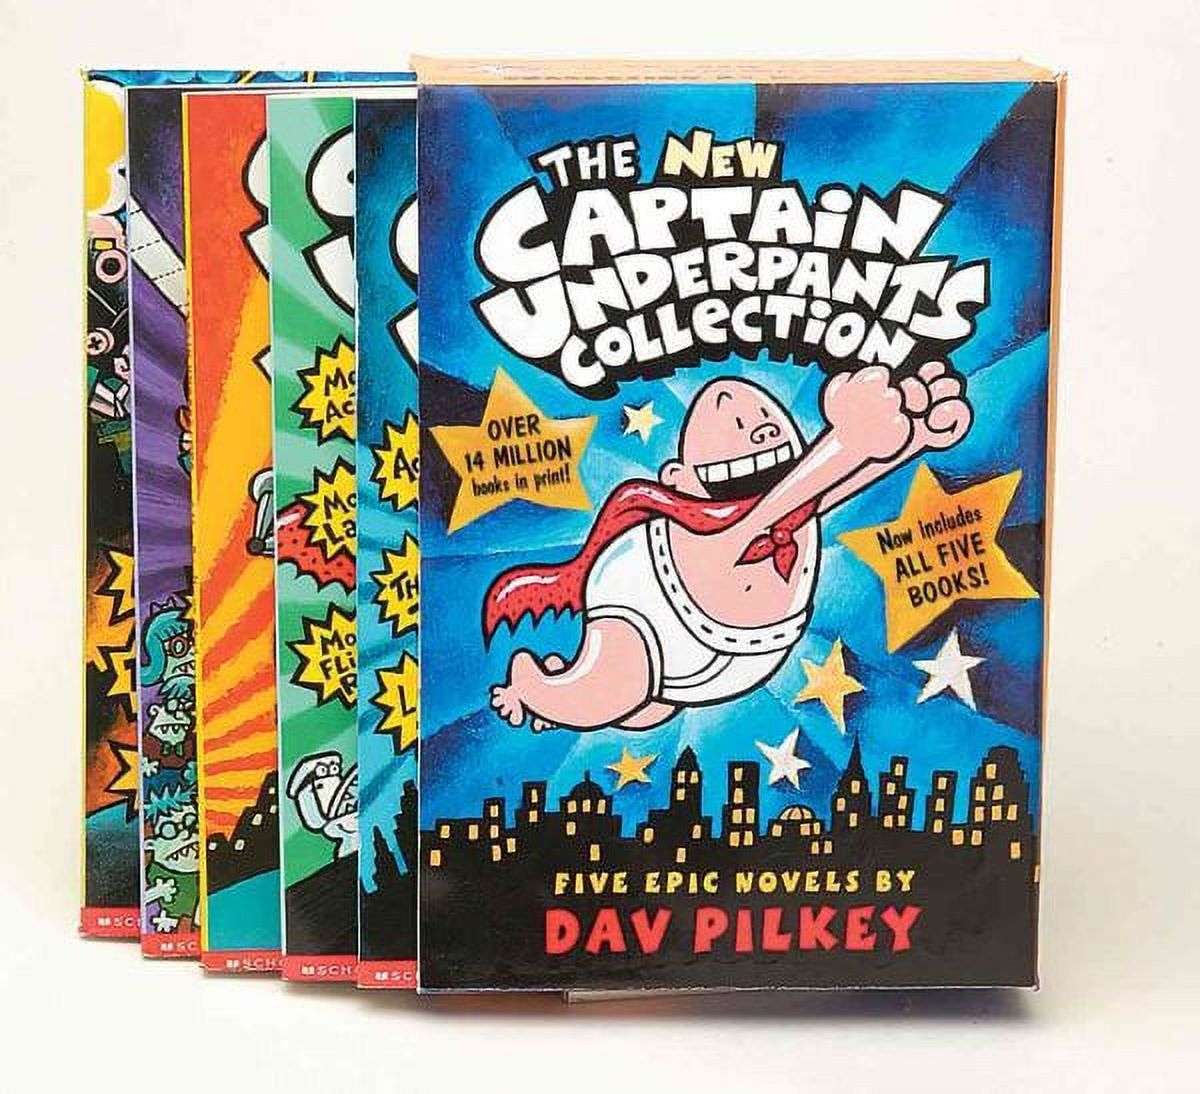 The New Captain Underpants Collection - image 1 of 2